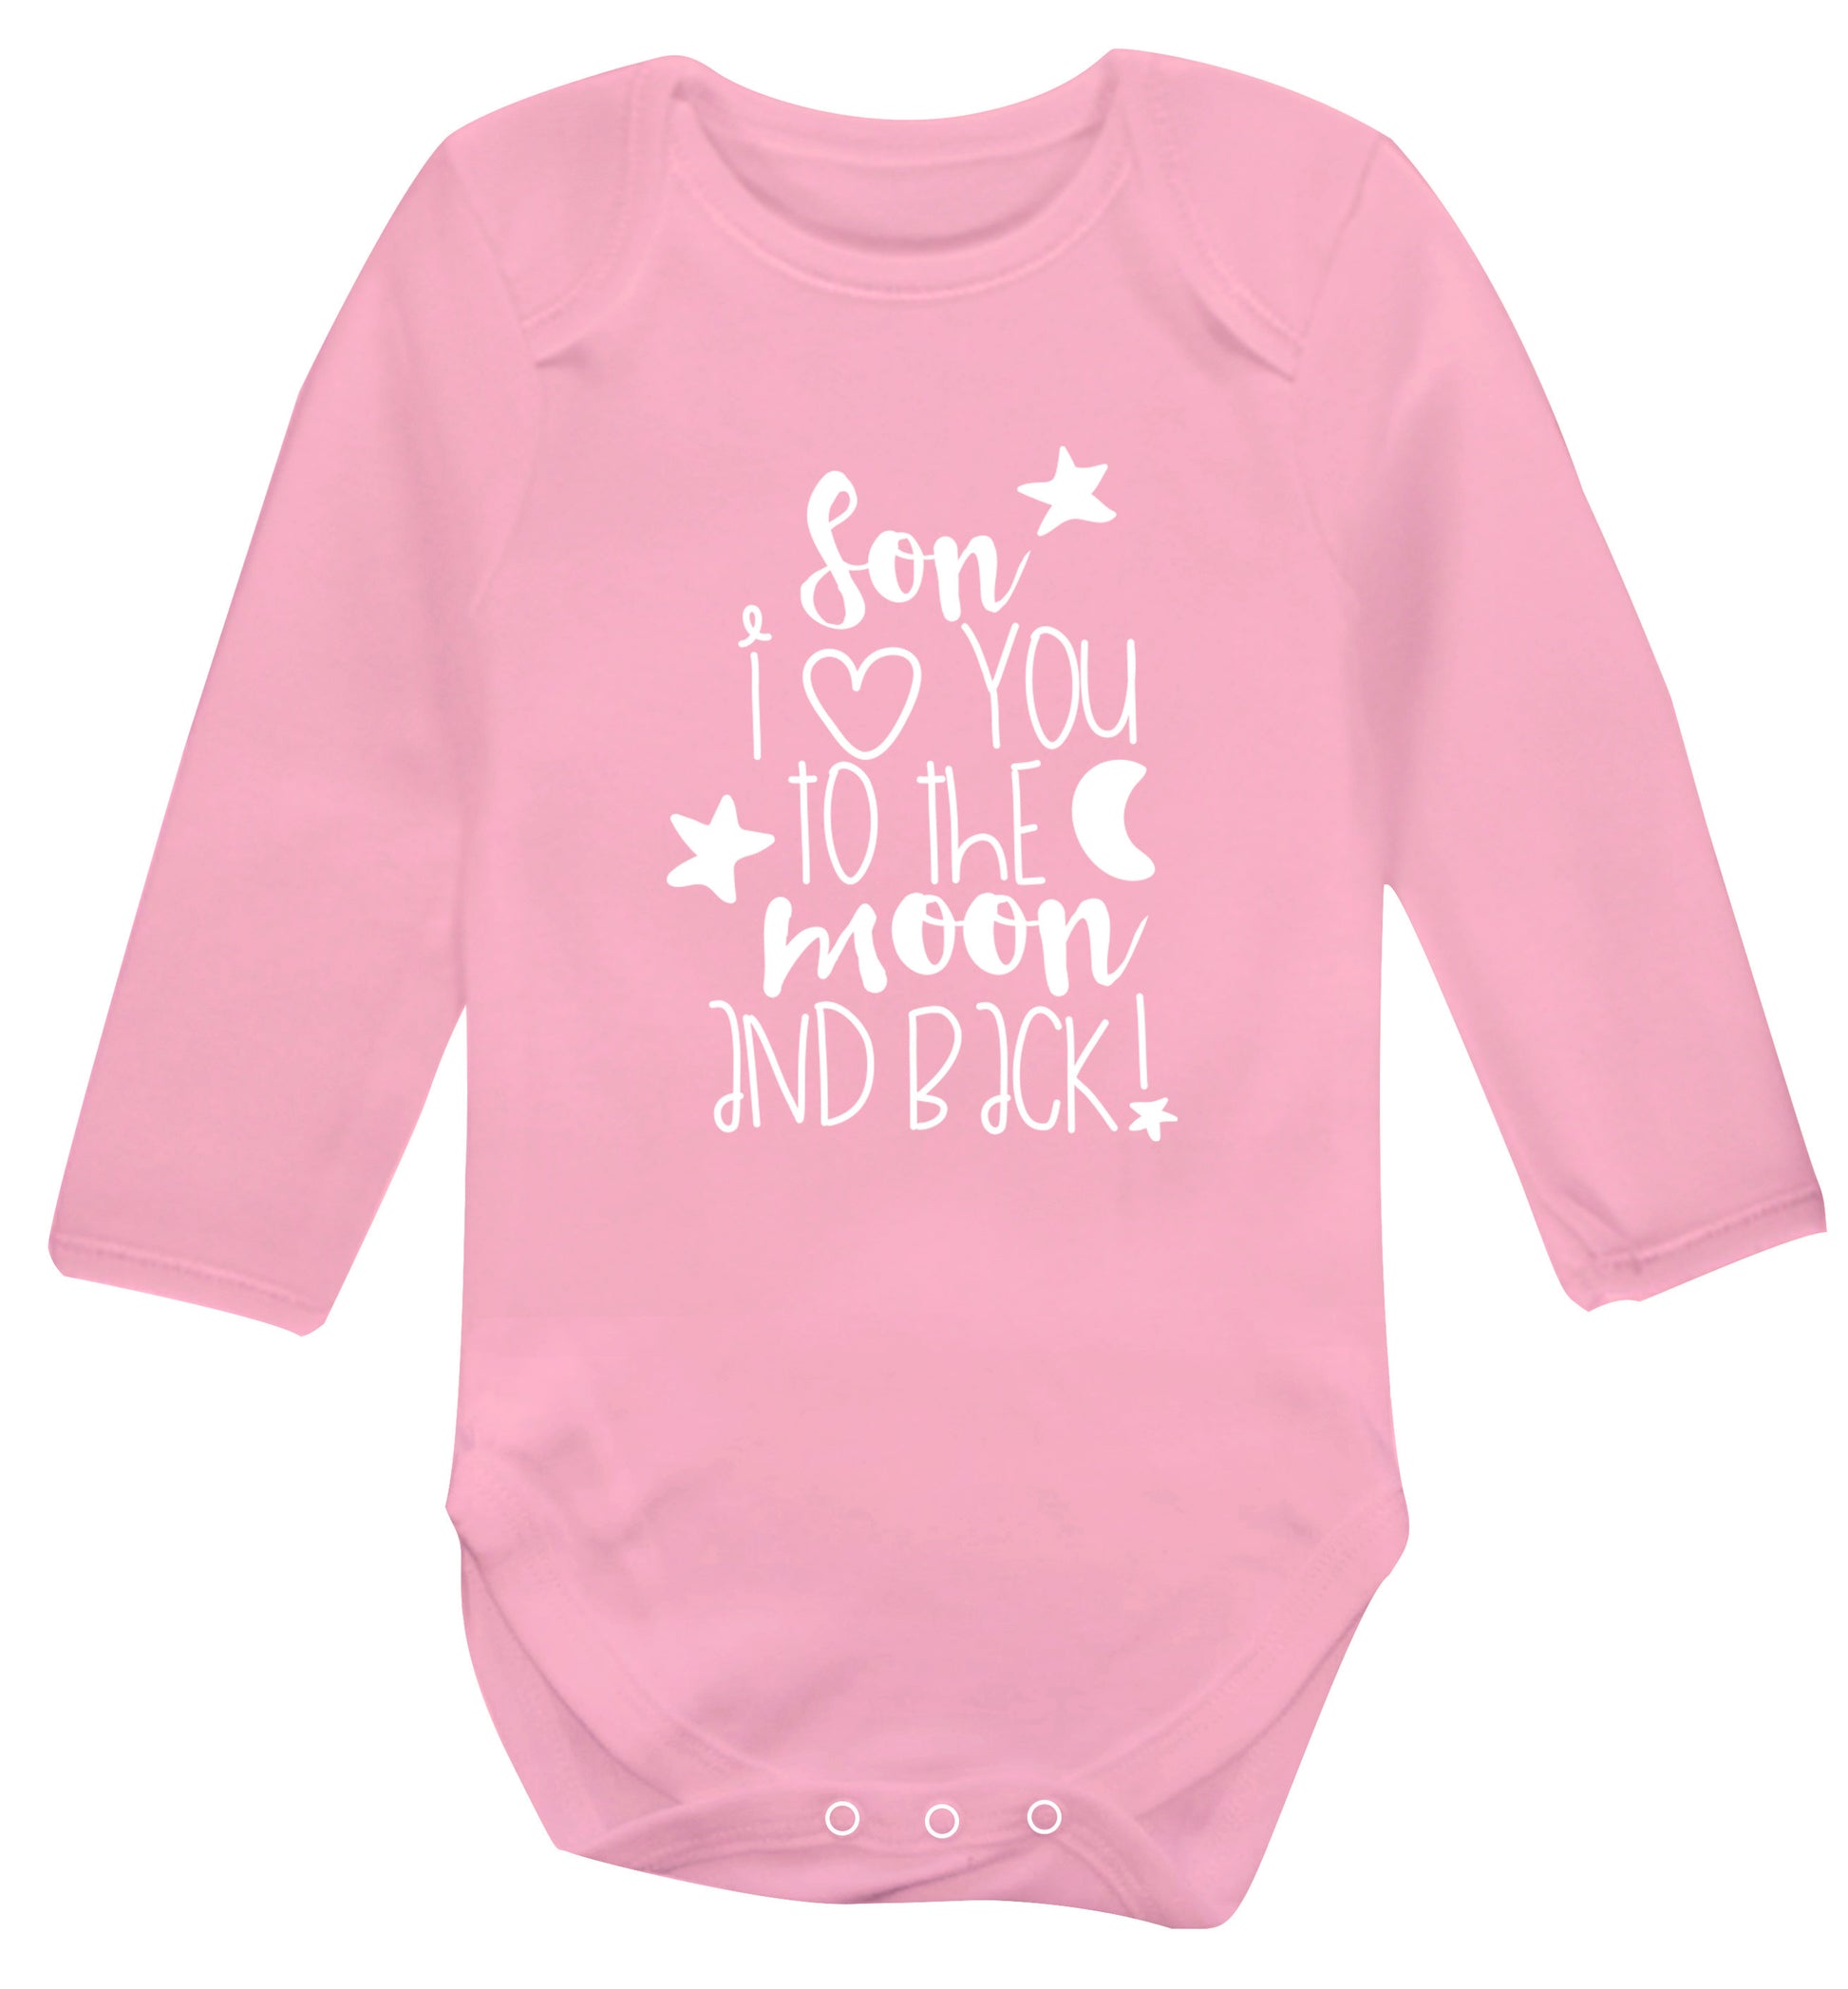 Son I love you to the moon and back Baby Vest long sleeved pale pink 6-12 months